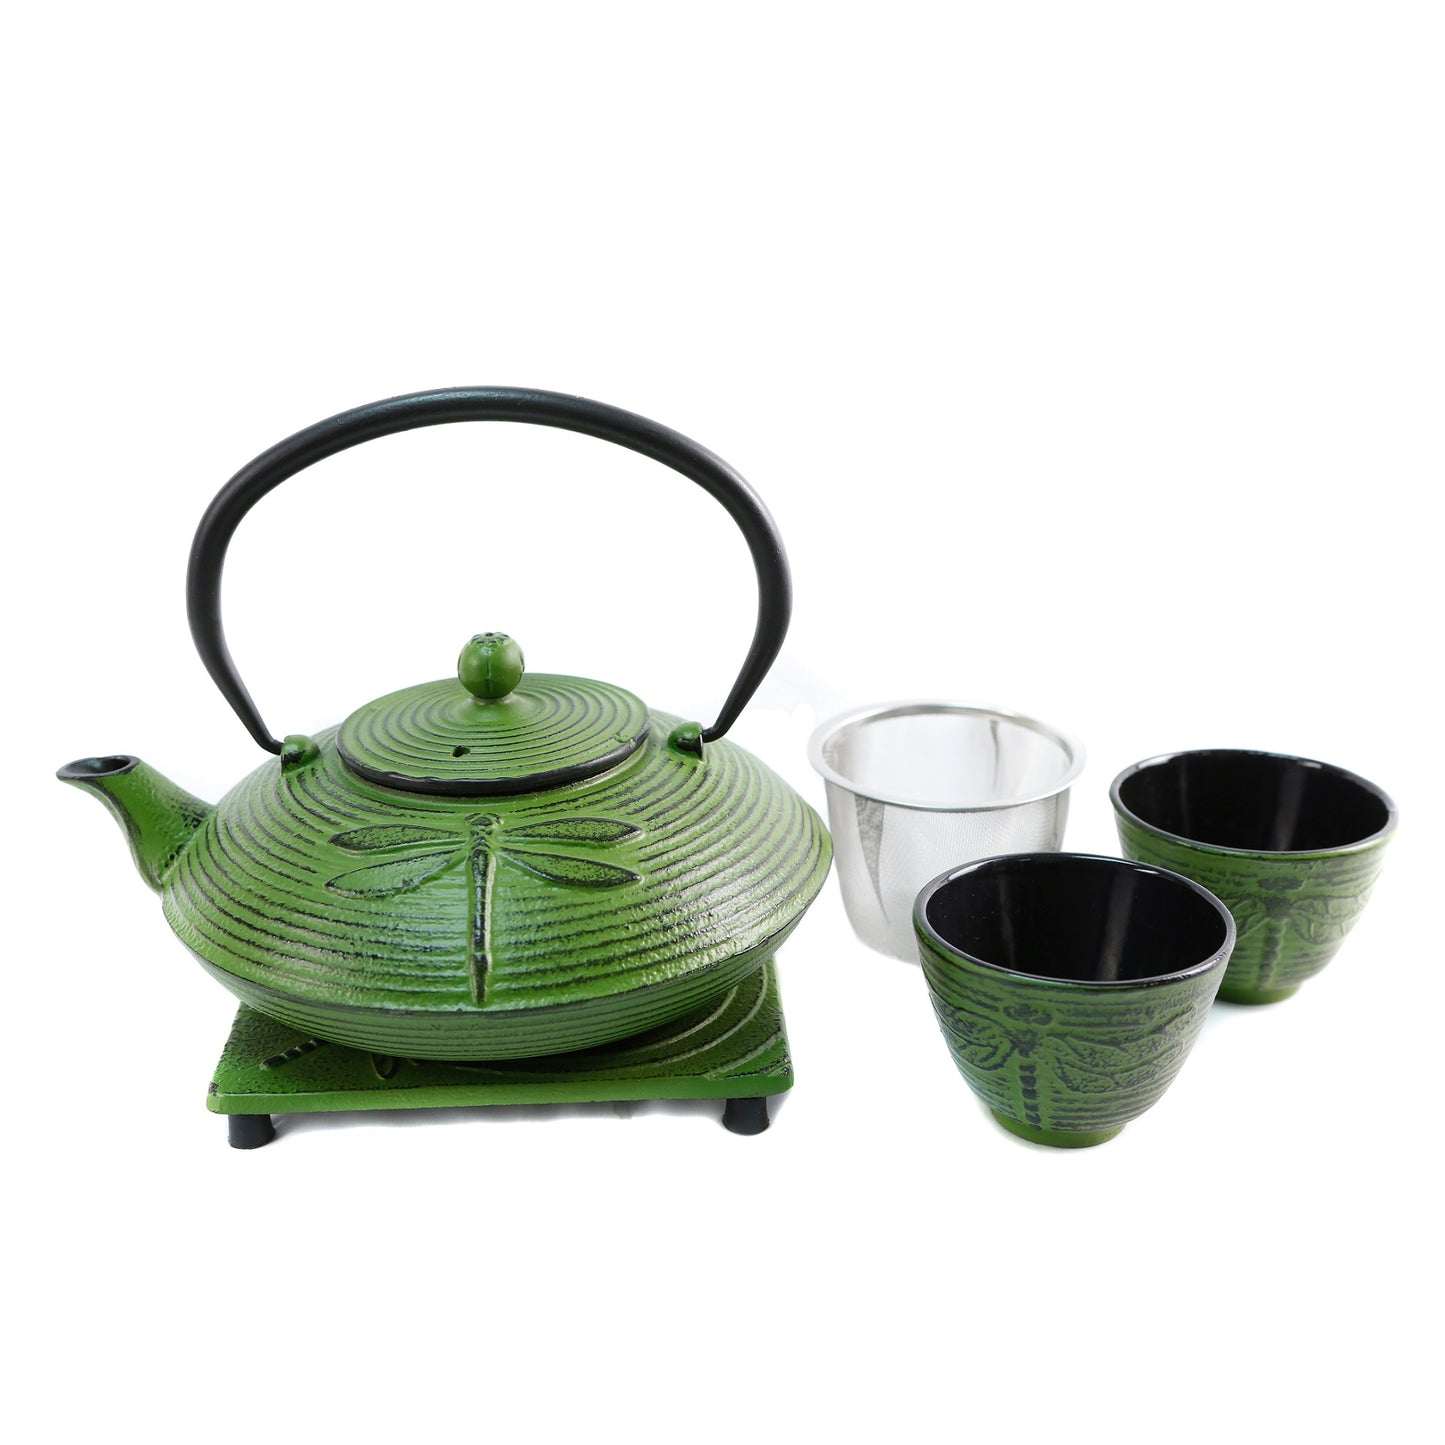 Dragonfly set with 2 cups 800ml (27oz)